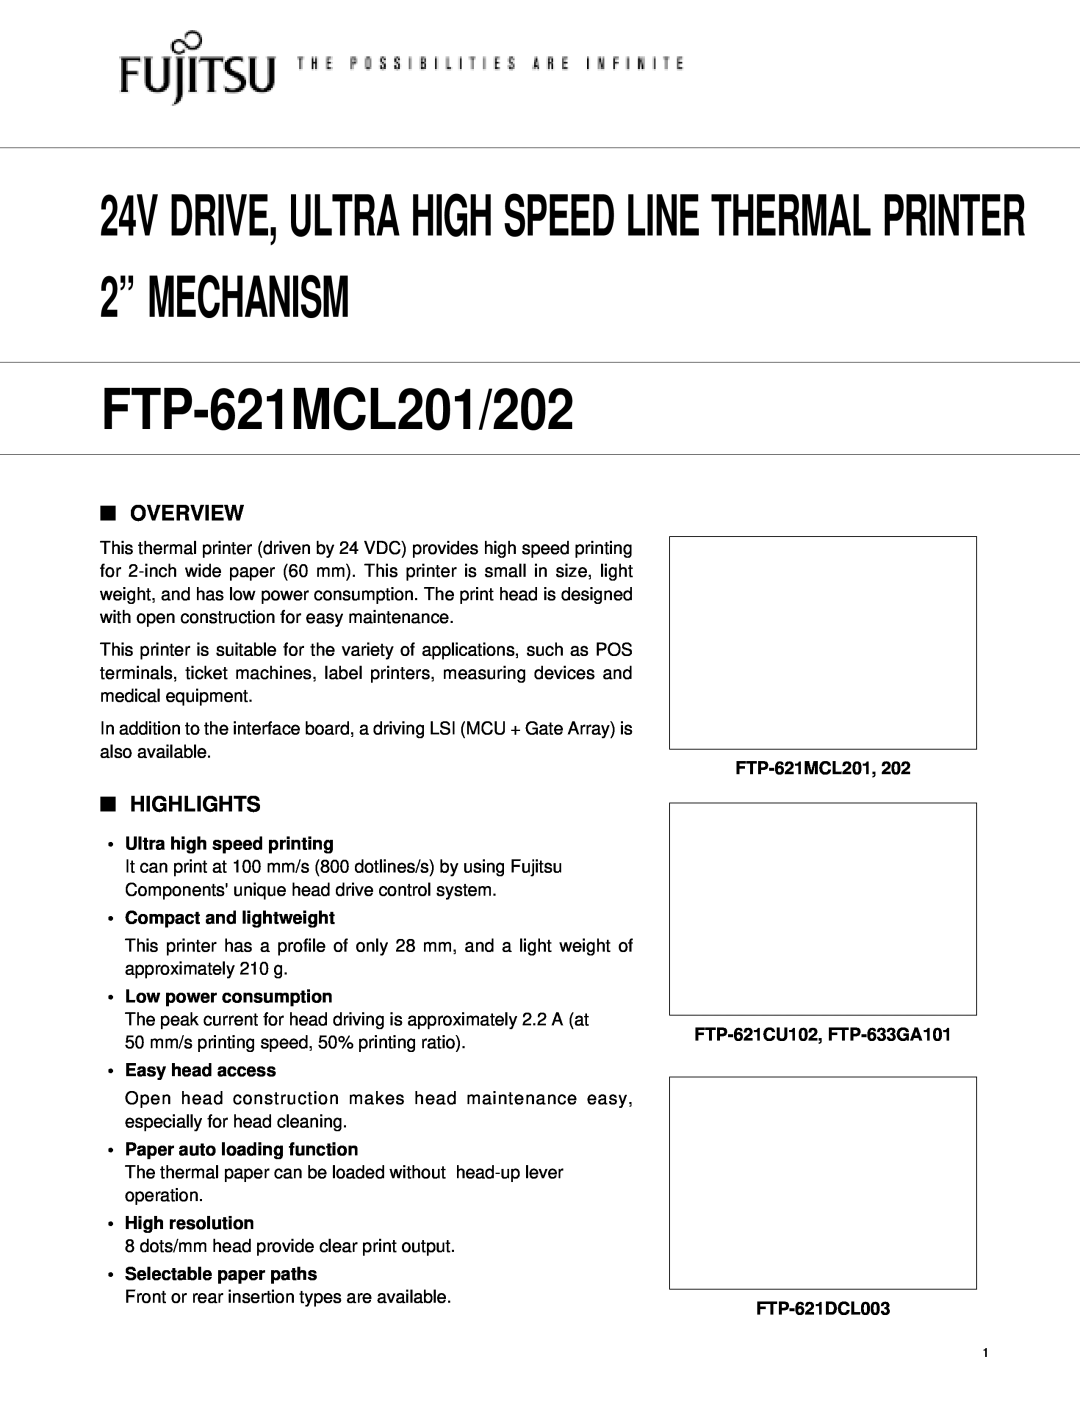 Fujitsu FTP-621CU102 manual Overview, Highlights, Ultra high speed printing, Compact and lightweight, Easy head access 